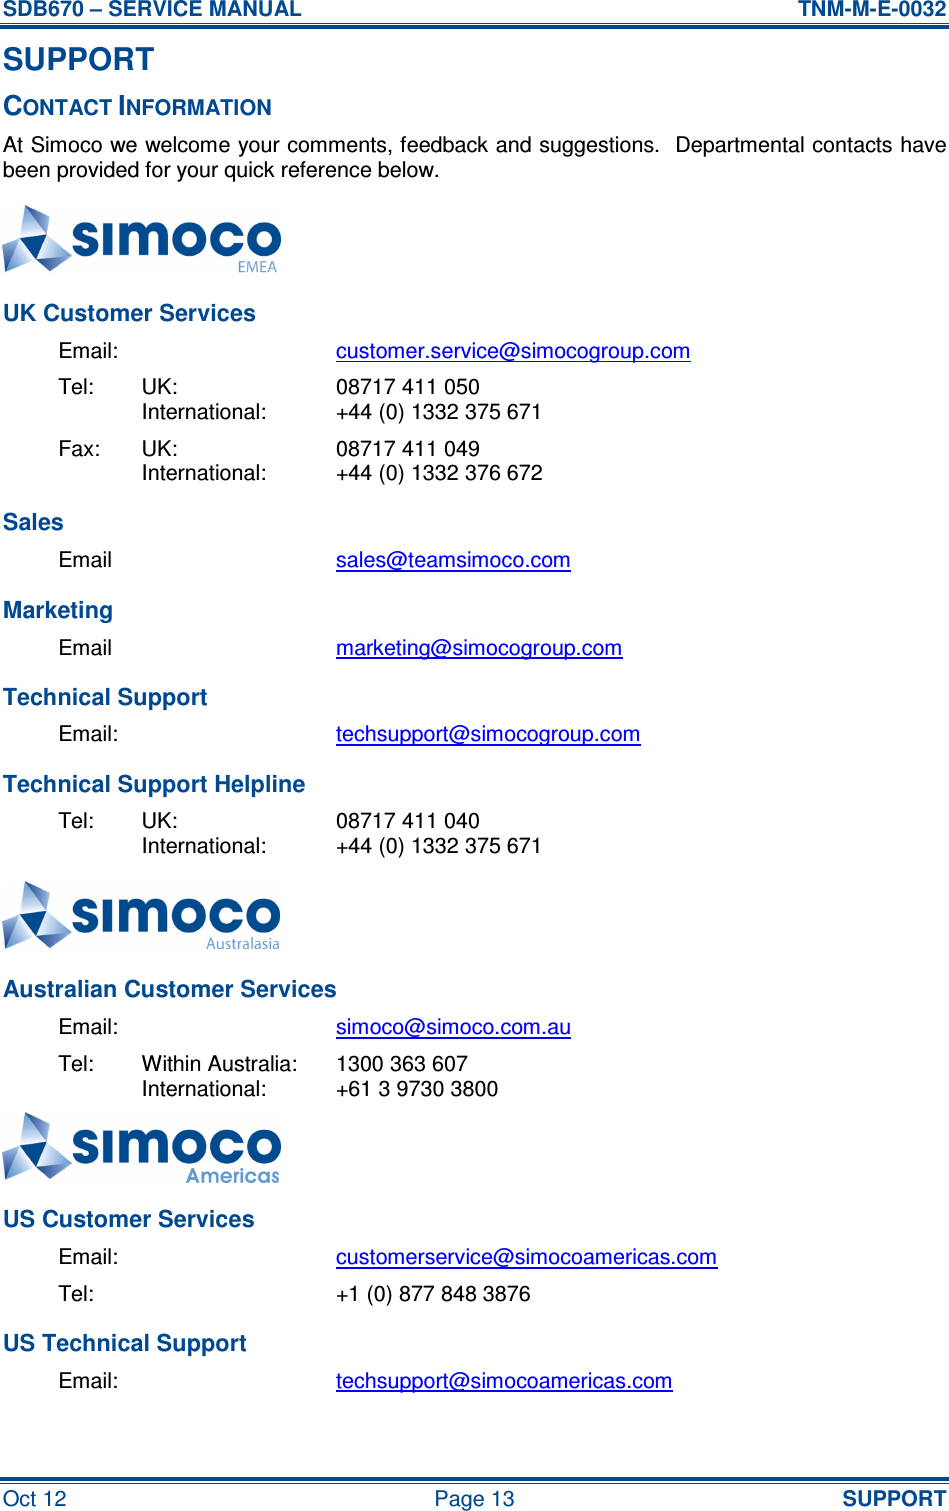 SDB670 – SERVICE MANUAL  TNM-M-E-0032 Oct 12  Page 13  SUPPORT SUPPORT CONTACT INFORMATION At Simoco we welcome your comments, feedback and suggestions.  Departmental contacts have been provided for your quick reference below.  UK Customer Services Email:  customer.service@simocogroup.com Tel:  UK:  08717 411 050   International:  +44 (0) 1332 375 671 Fax:  UK:  08717 411 049   International:  +44 (0) 1332 376 672 Sales Email  sales@teamsimoco.com Marketing Email  marketing@simocogroup.com Technical Support Email:  techsupport@simocogroup.com Technical Support Helpline Tel:  UK:  08717 411 040   International:  +44 (0) 1332 375 671  Australian Customer Services Email:  simoco@simoco.com.au Tel:  Within Australia:  1300 363 607   International:  +61 3 9730 3800  US Customer Services Email:  customerservice@simocoamericas.com Tel:    +1 (0) 877 848 3876 US Technical Support Email:  techsupport@simocoamericas.com  